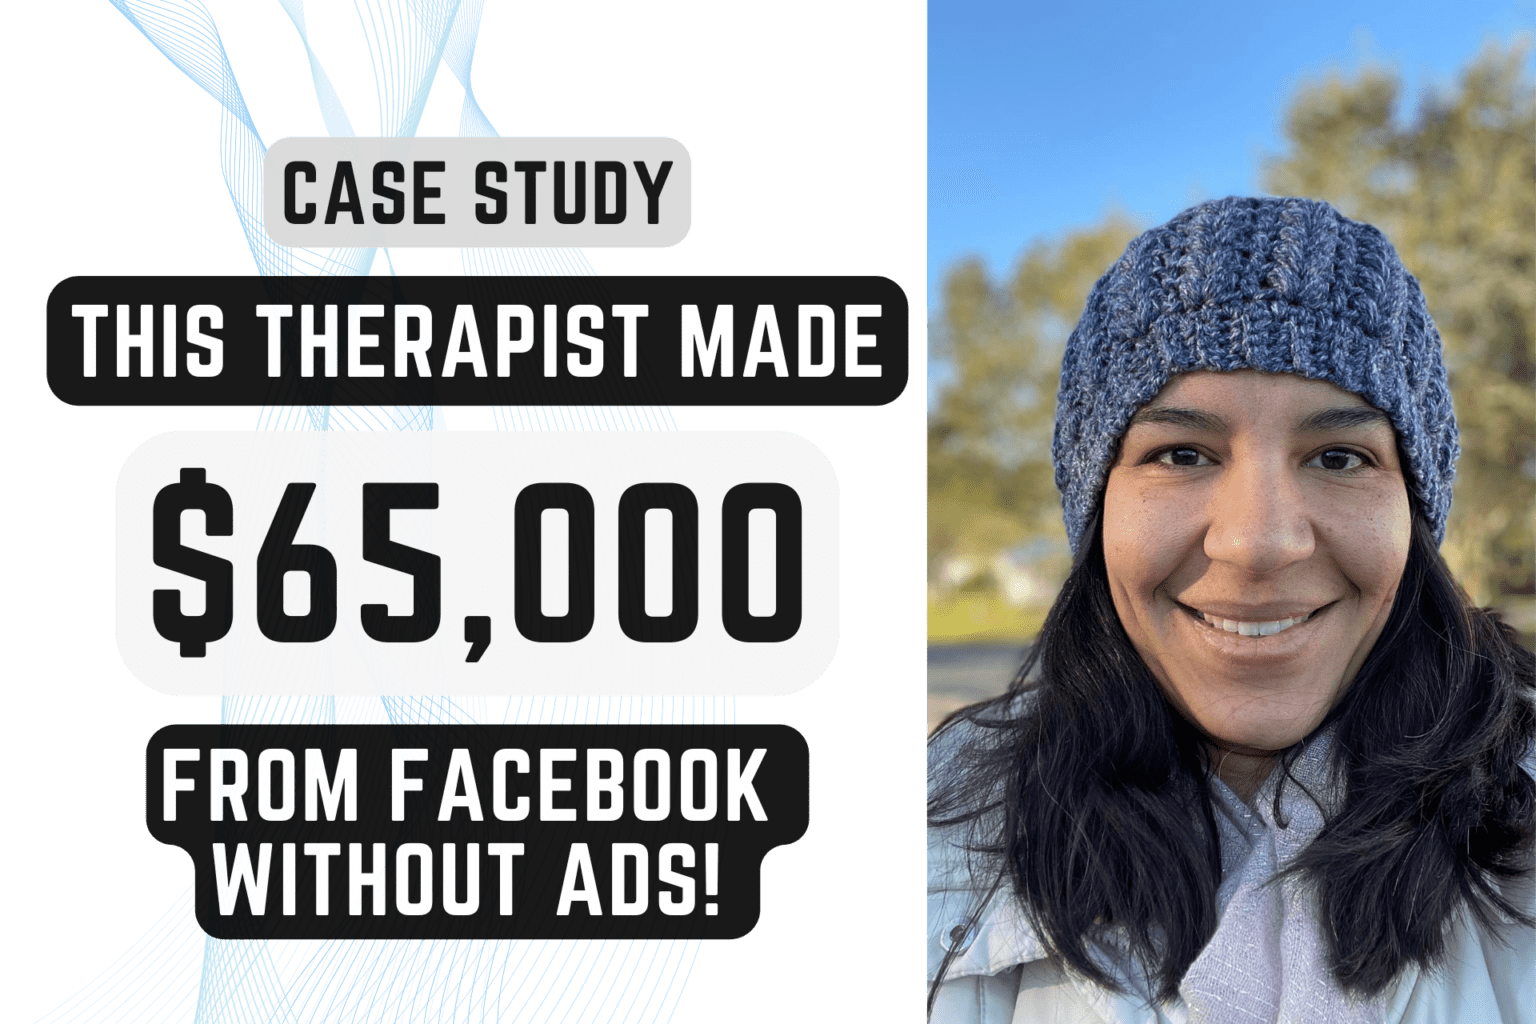 See How Dr Olivera Generated 65 000 In New Revenue With Her Facebook